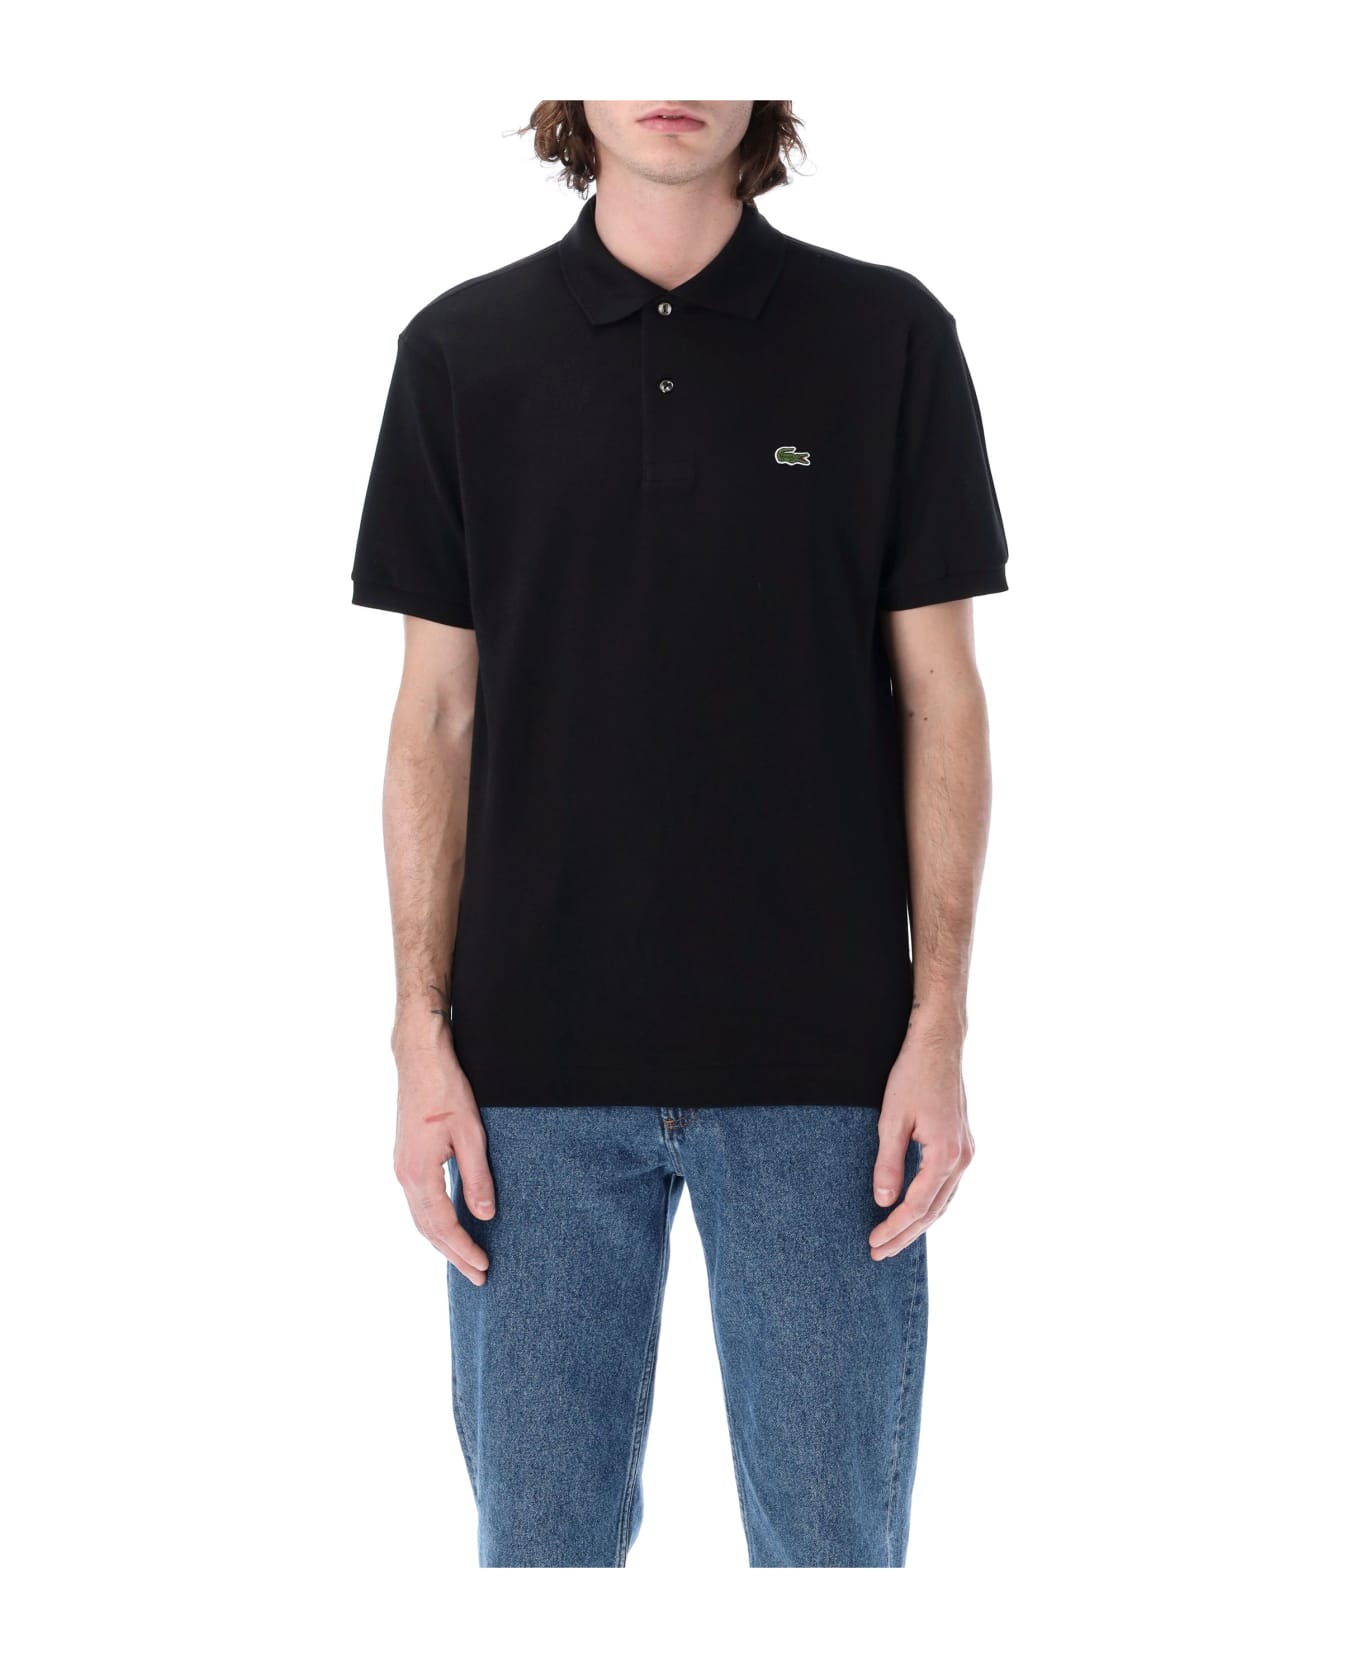 Lacoste Classic Fit Polo Shirt - BLACK ポロシャツ